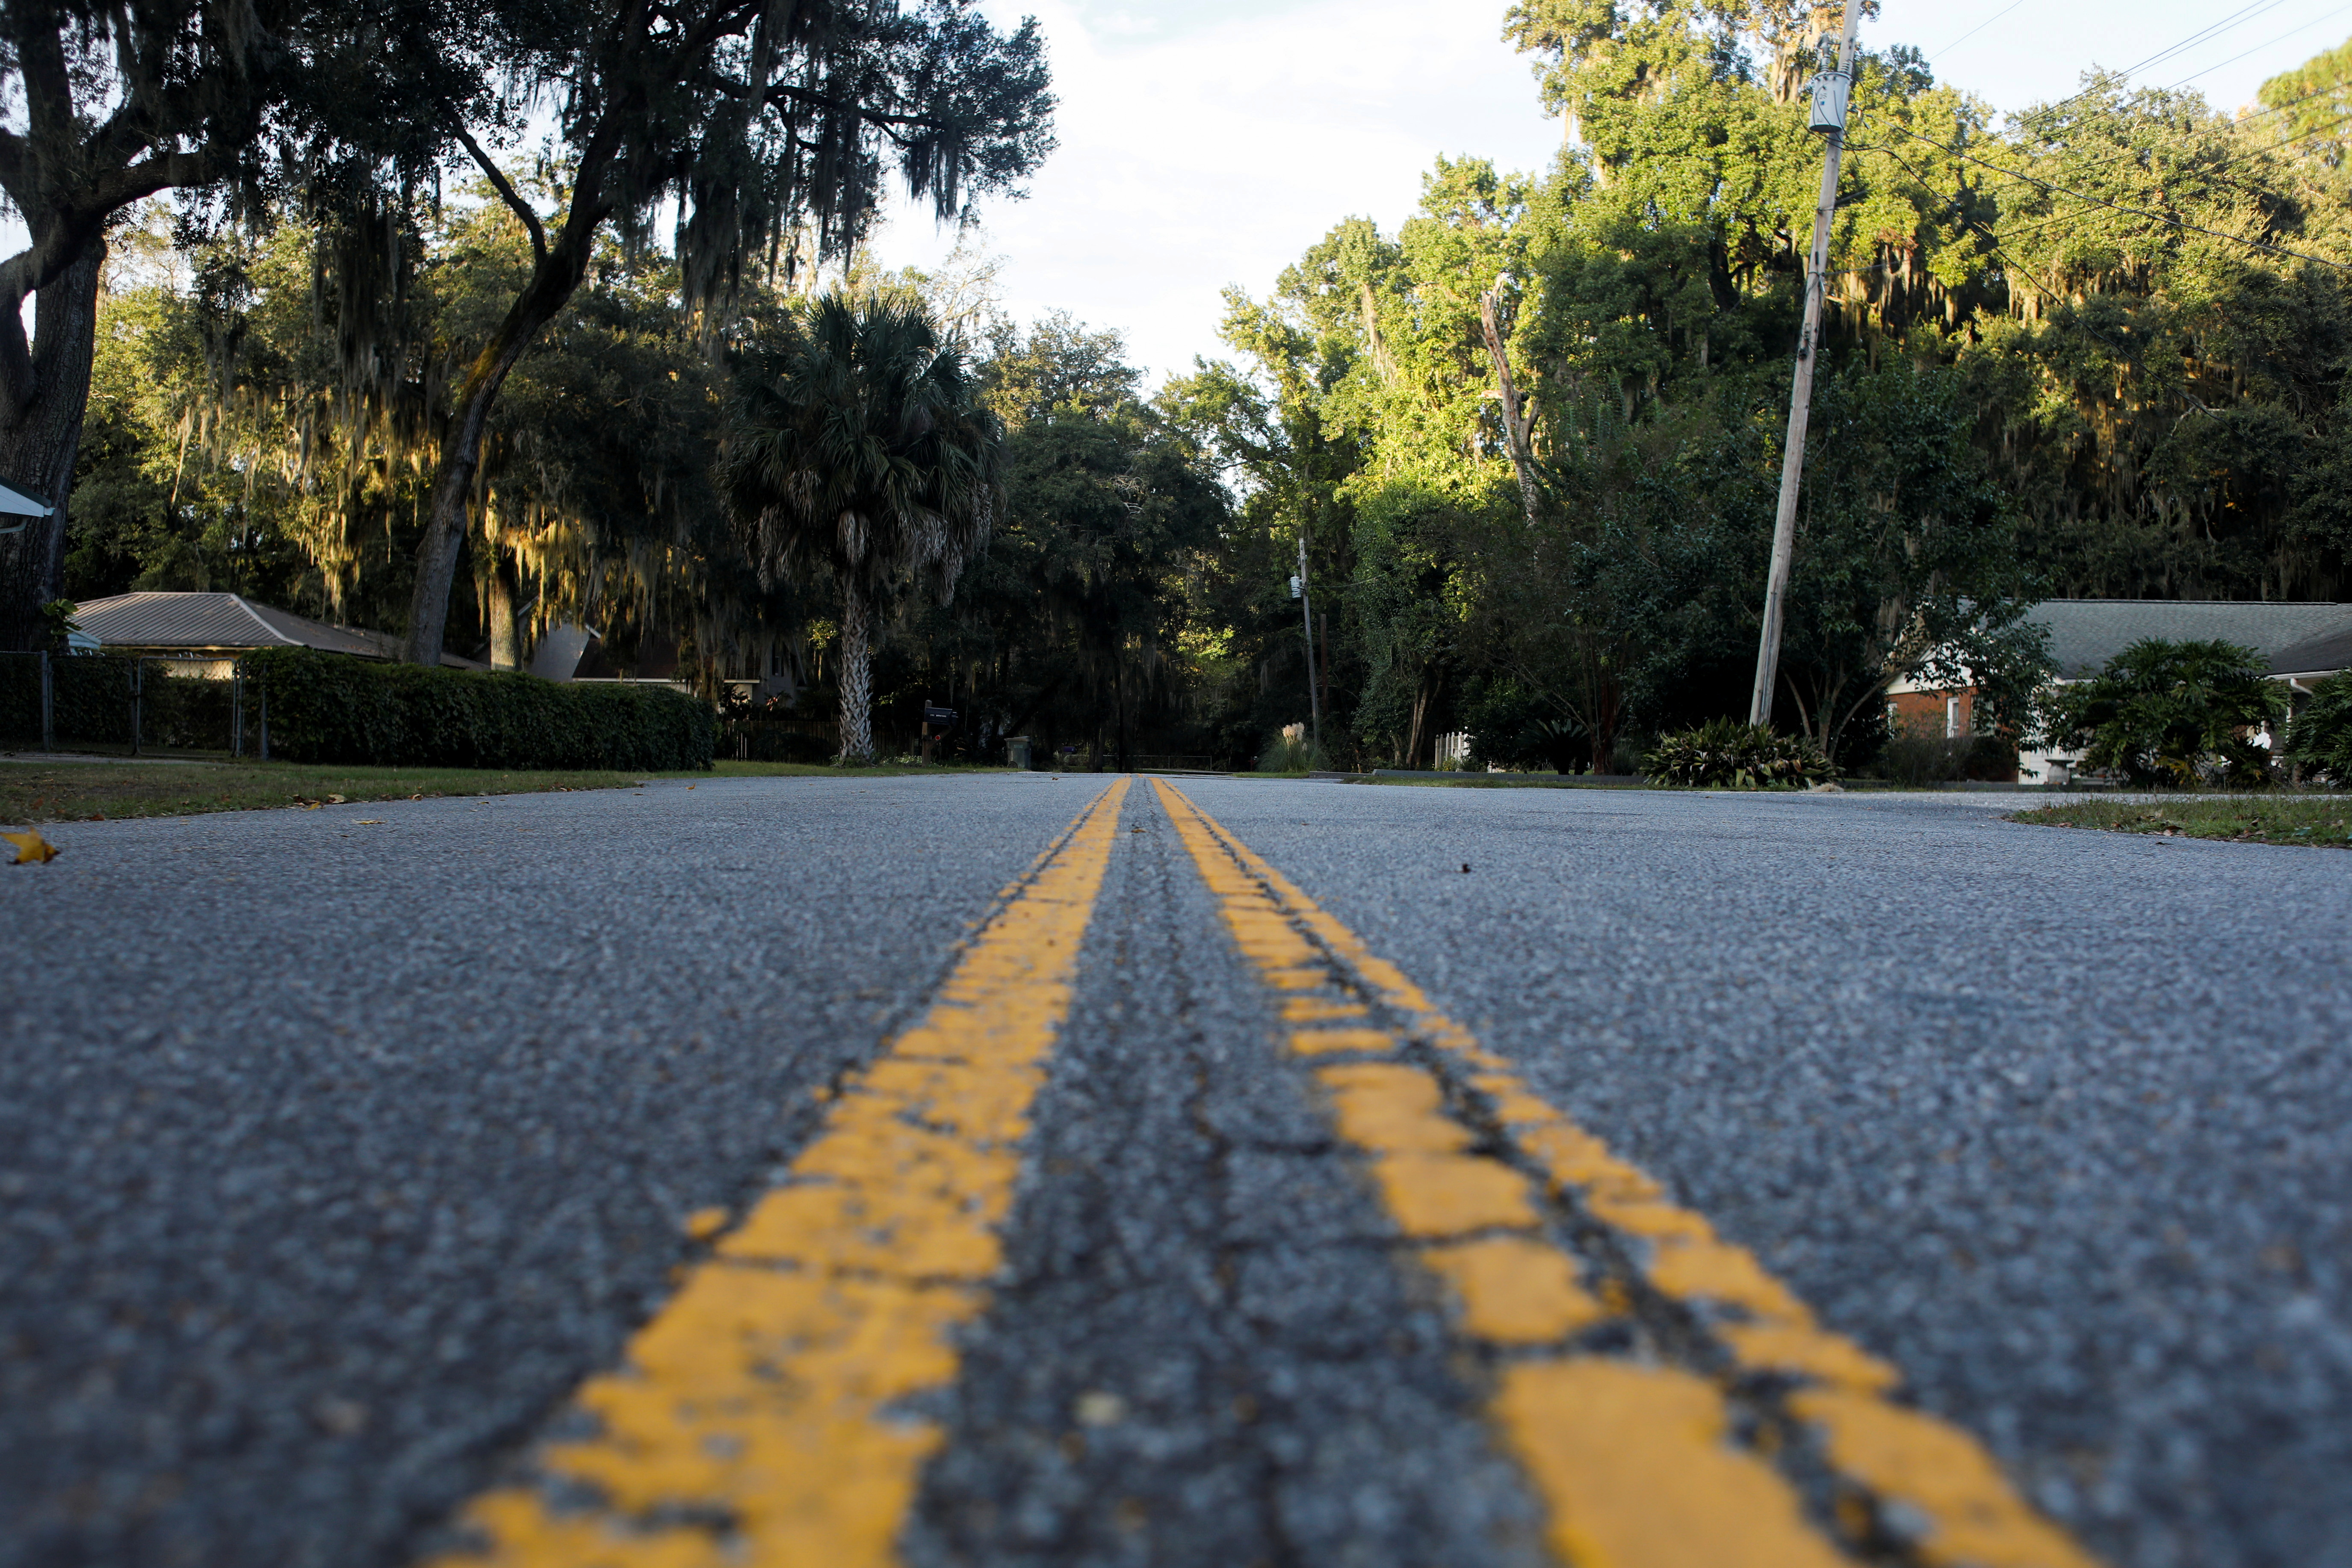 View of a road at the Satilla Shores subdivision where Ahmaud Arbery was shot to death while going for a run last year February 2020 in Brunswick